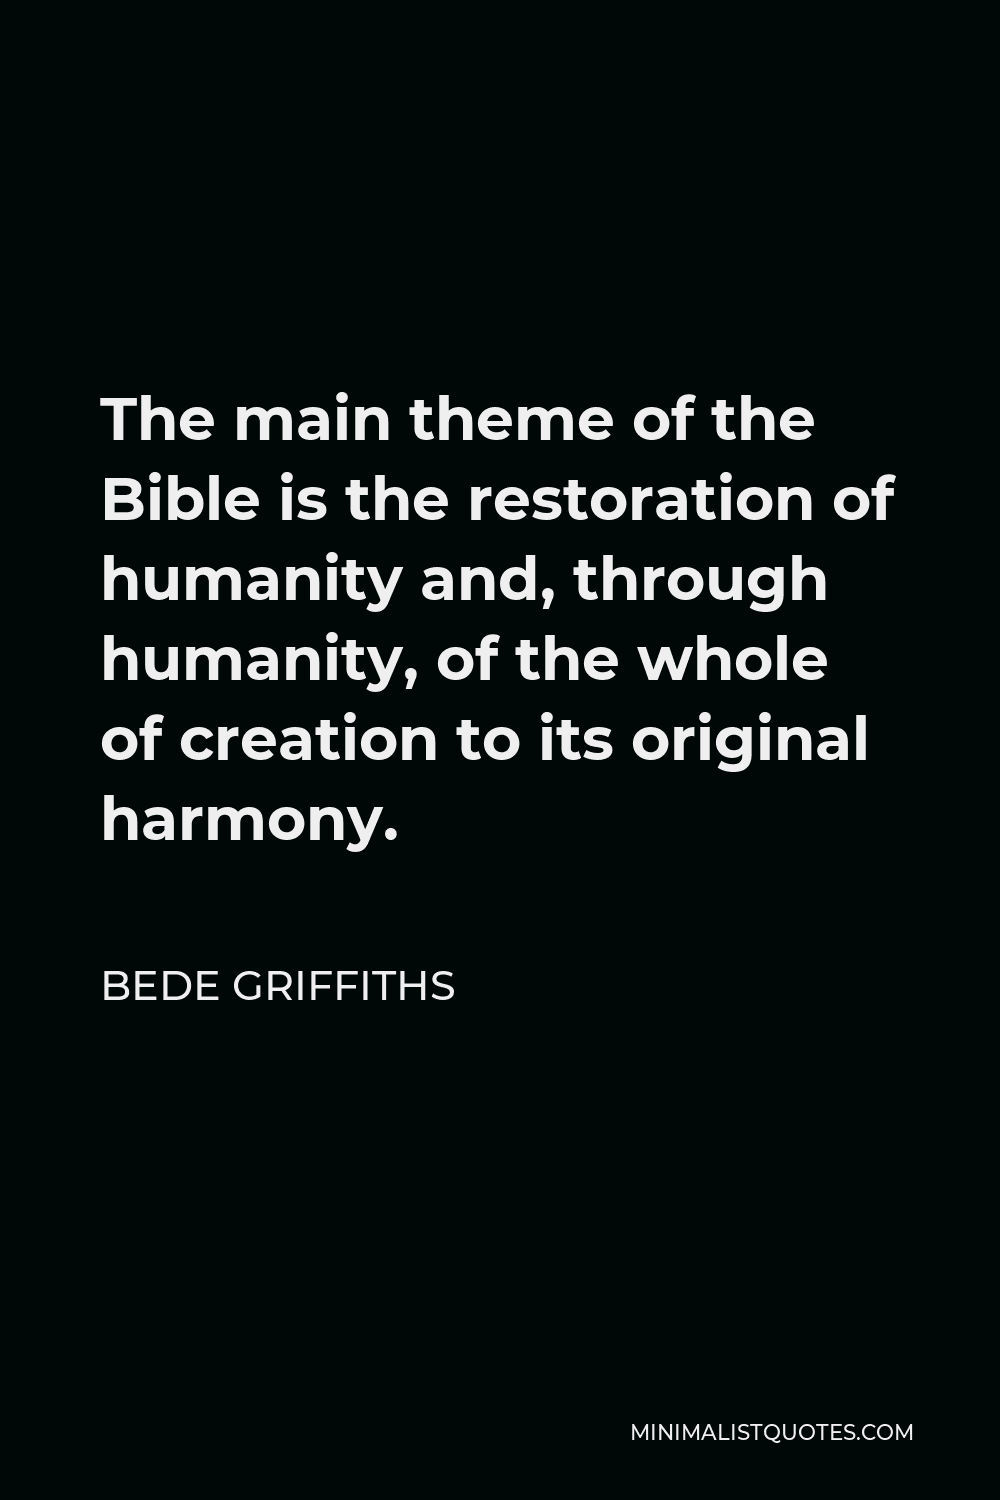 Bede Griffiths Quote - The main theme of the Bible is the restoration of humanity and, through humanity, of the whole of creation to its original harmony.